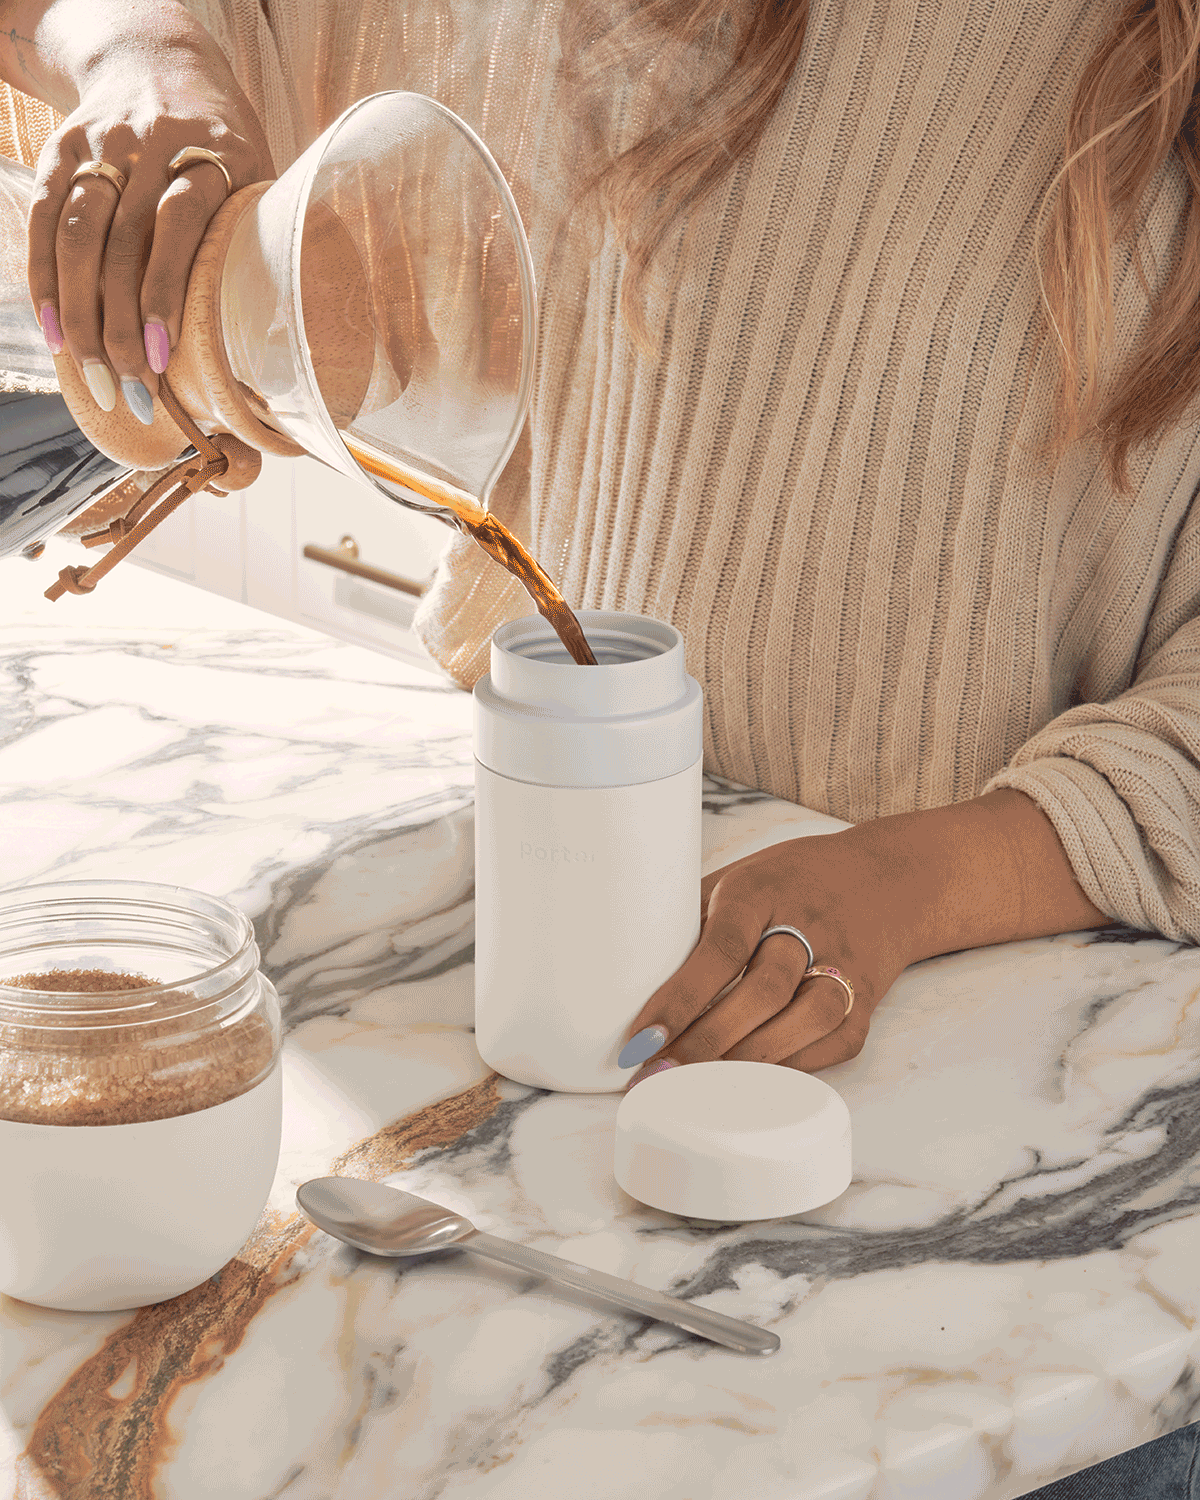 10 Best Travel Coffee Mugs for 2022- Insulated Travel Mugs